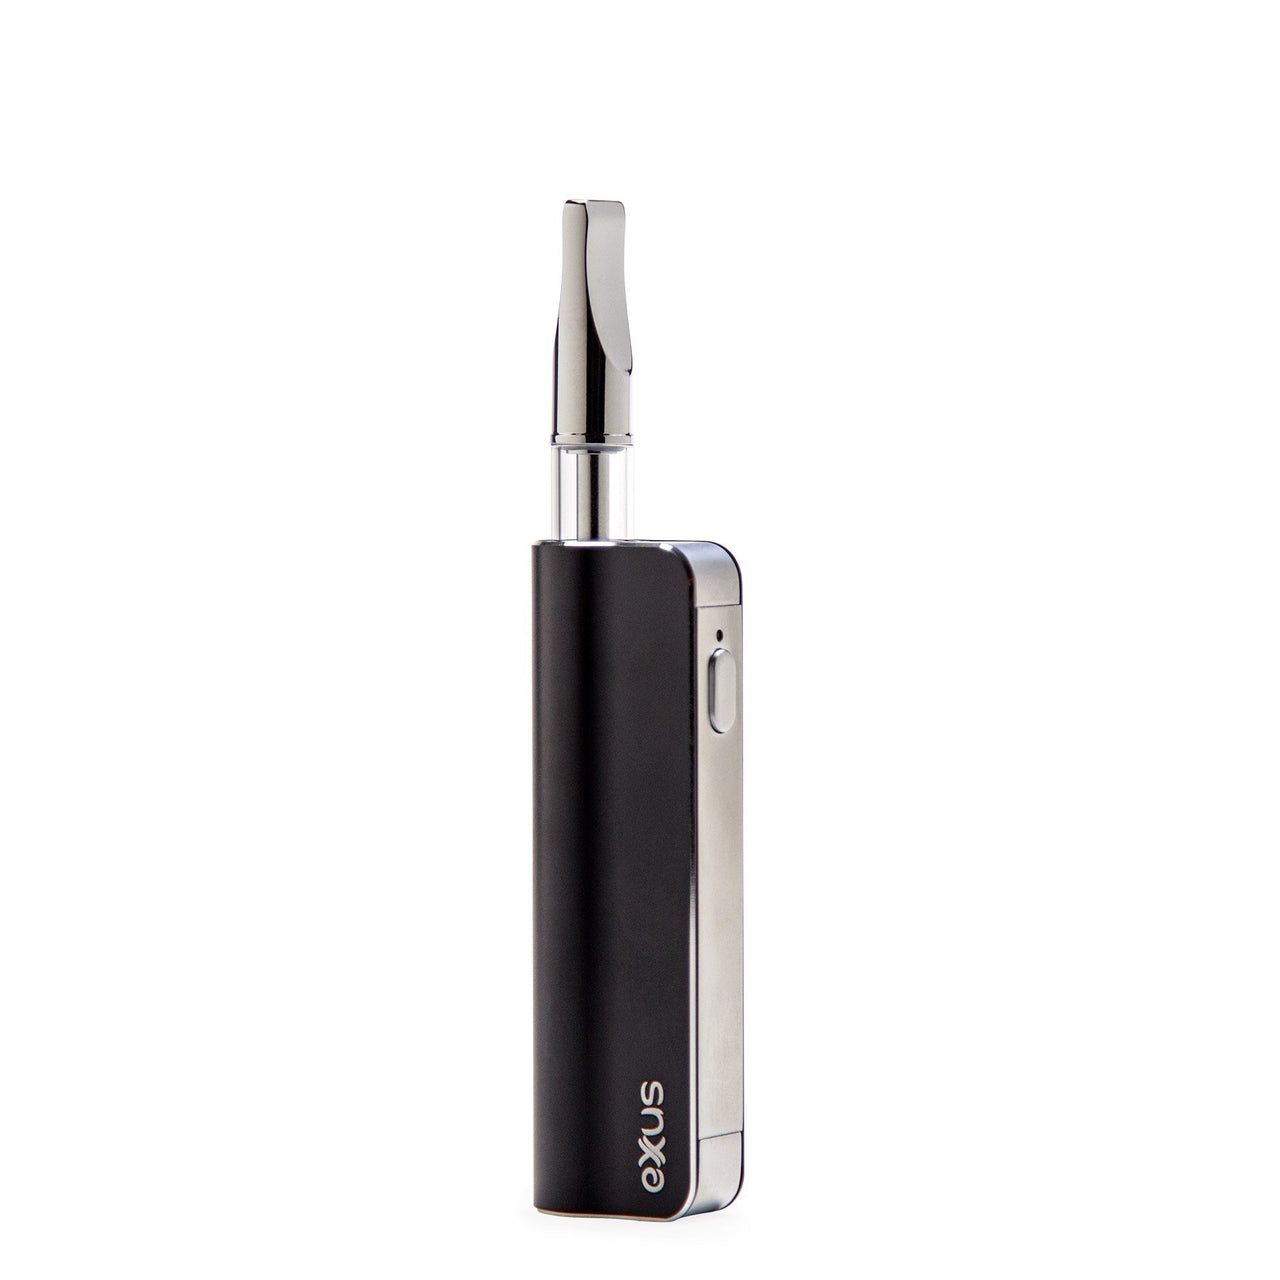 Exxus Snap VV Cartridge Vape Battery - 420 Science - The most trusted online smoke shop.